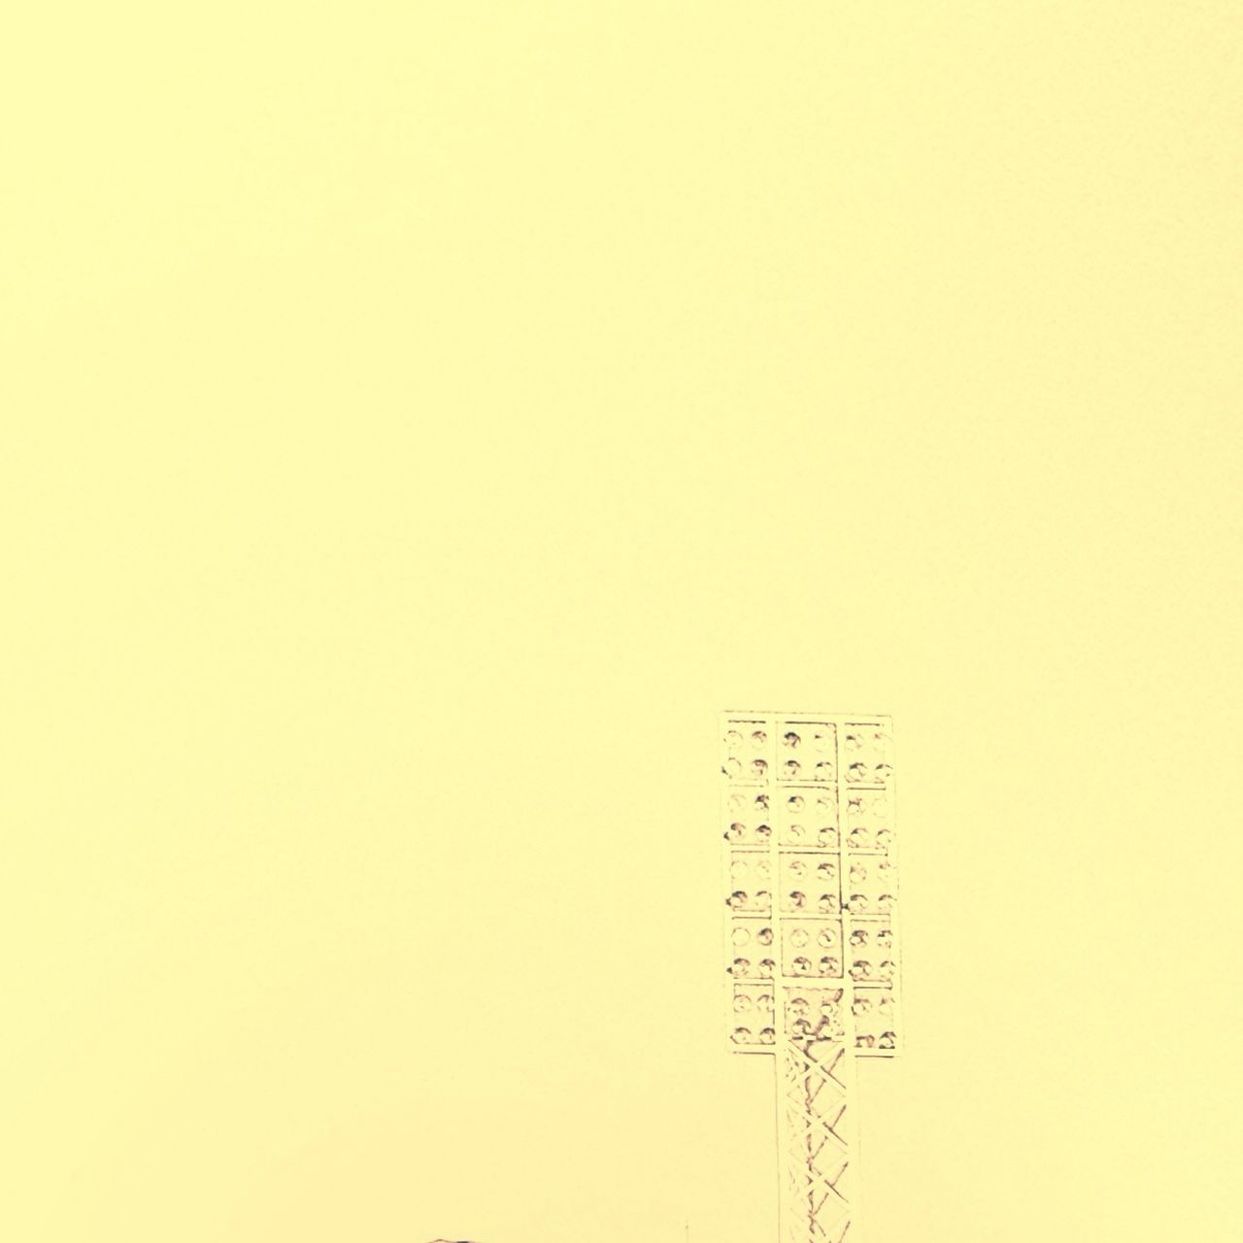 Low angle view of floodlight against clear sky